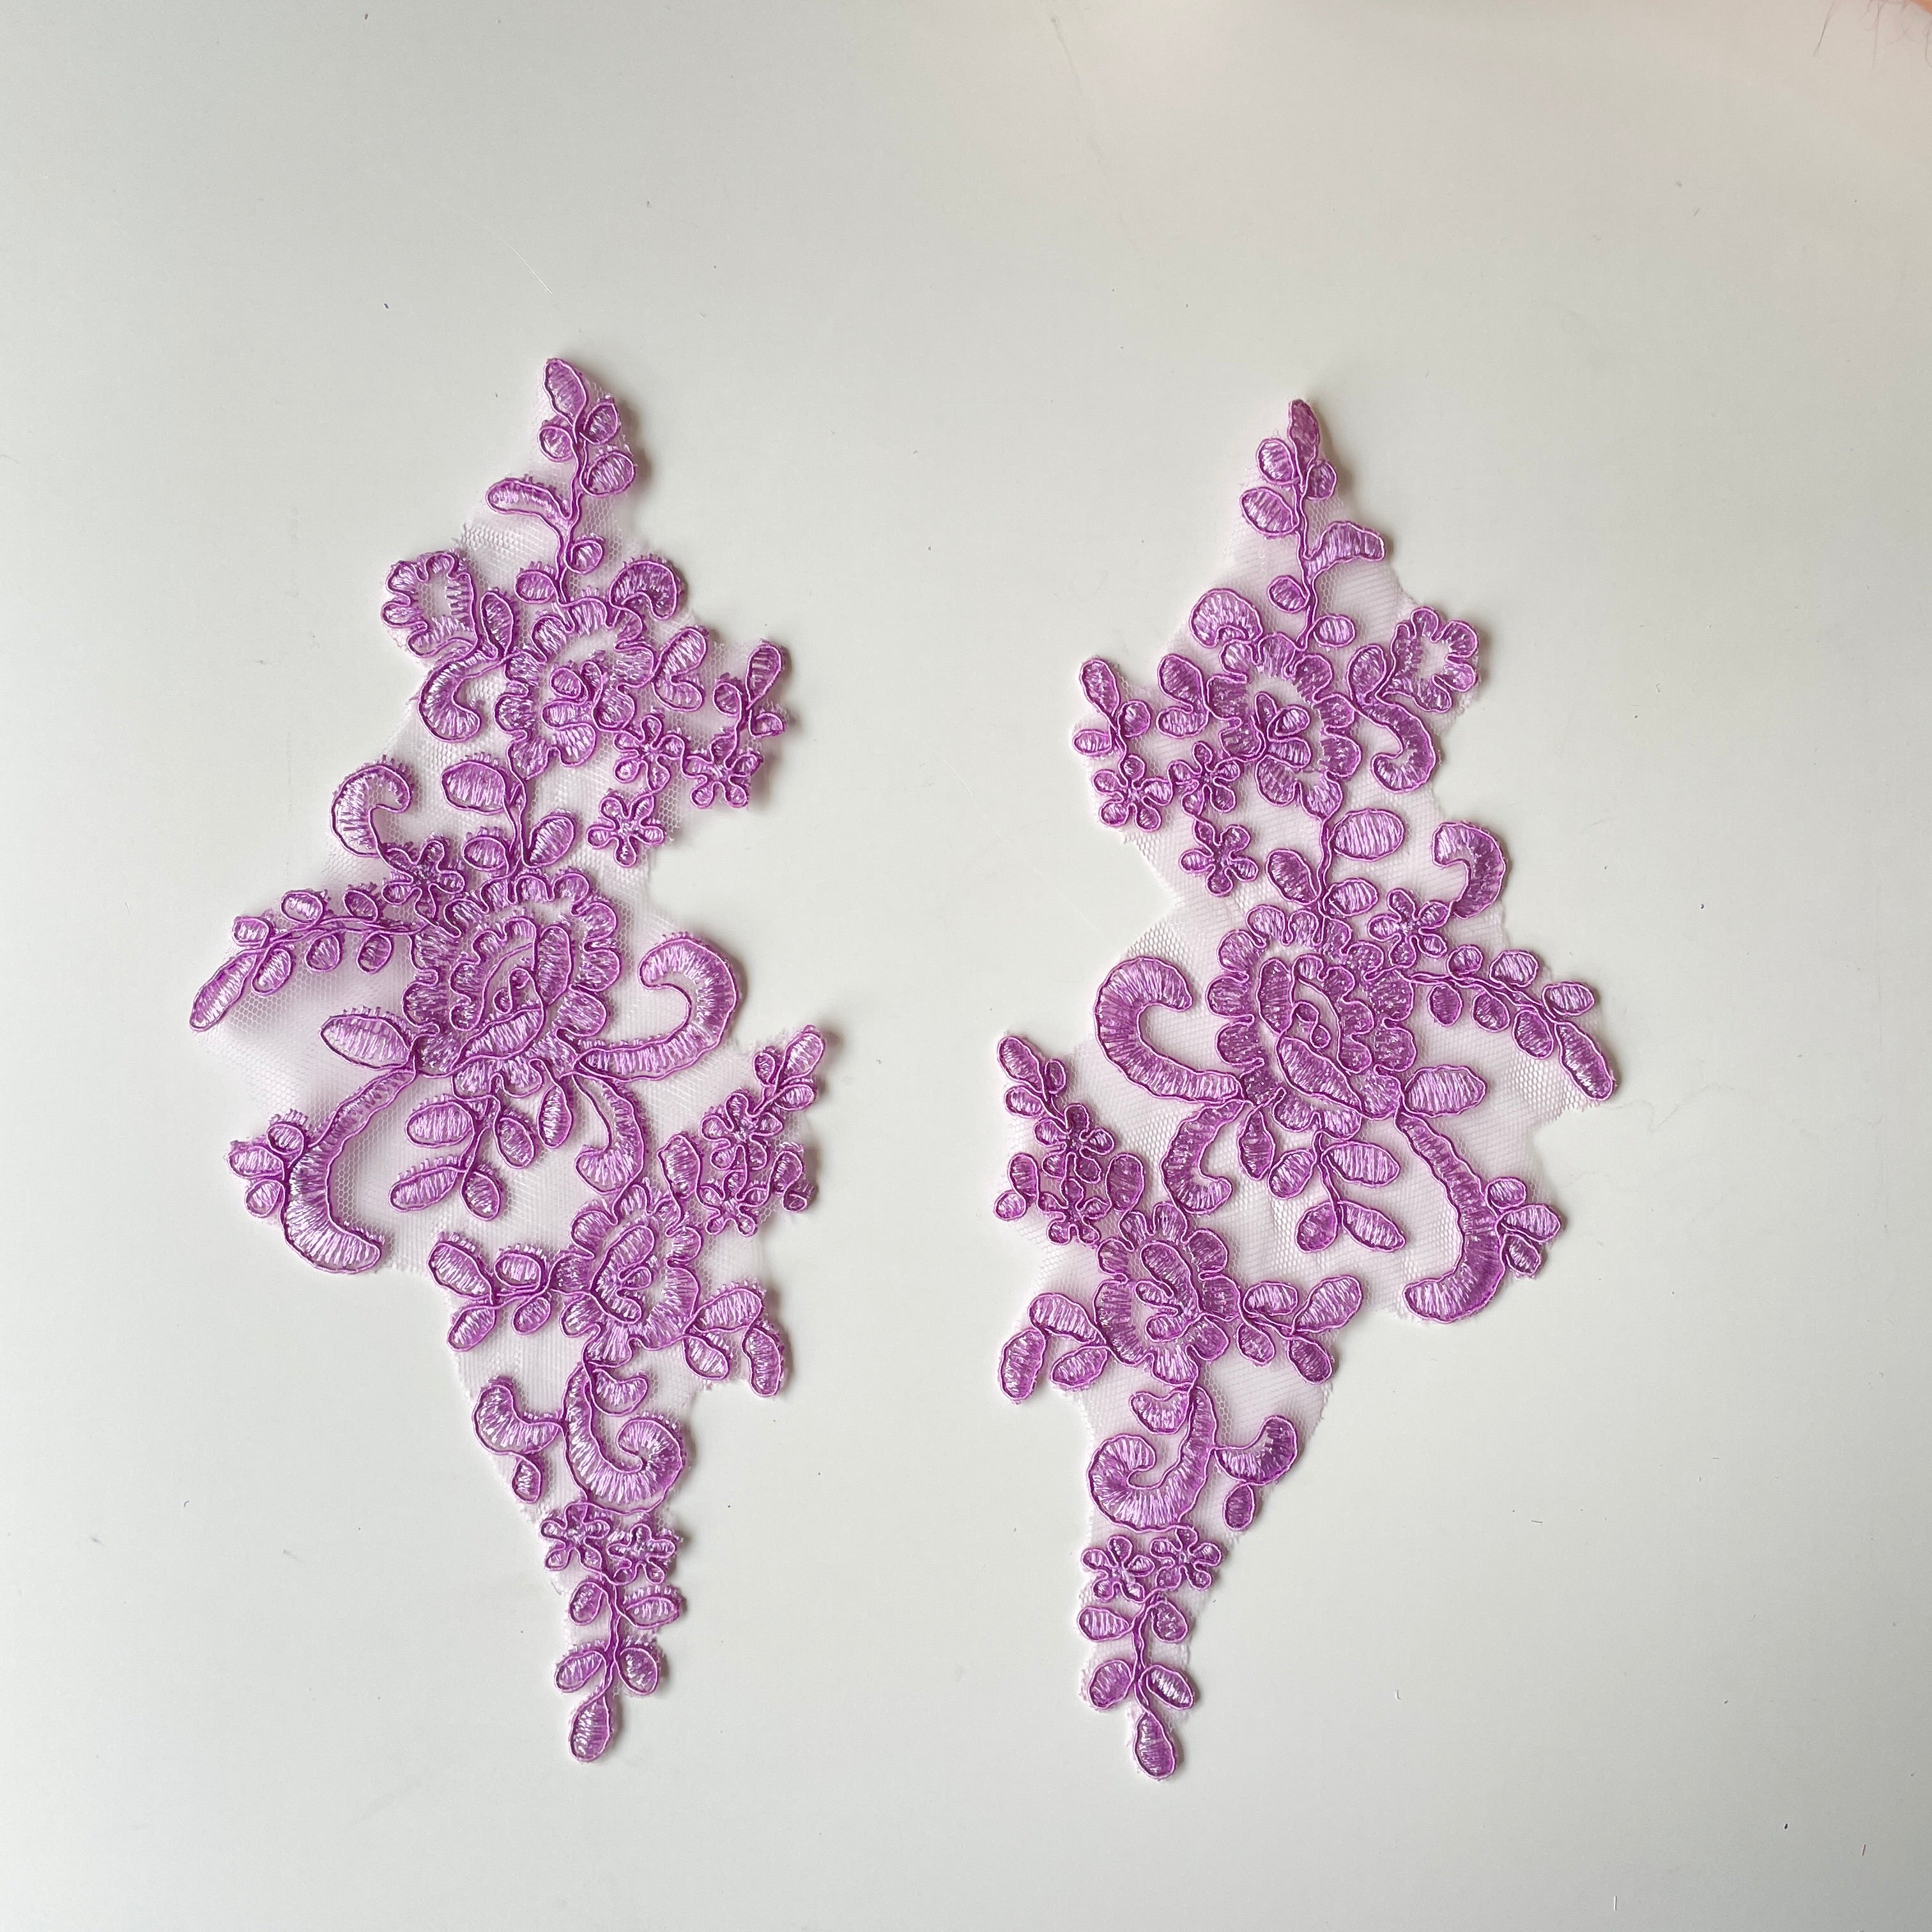 Heavily embroidered and corded purple mirrored lace applique pair. The appliques have a pink purple colour tone and are laying flat on a white background.